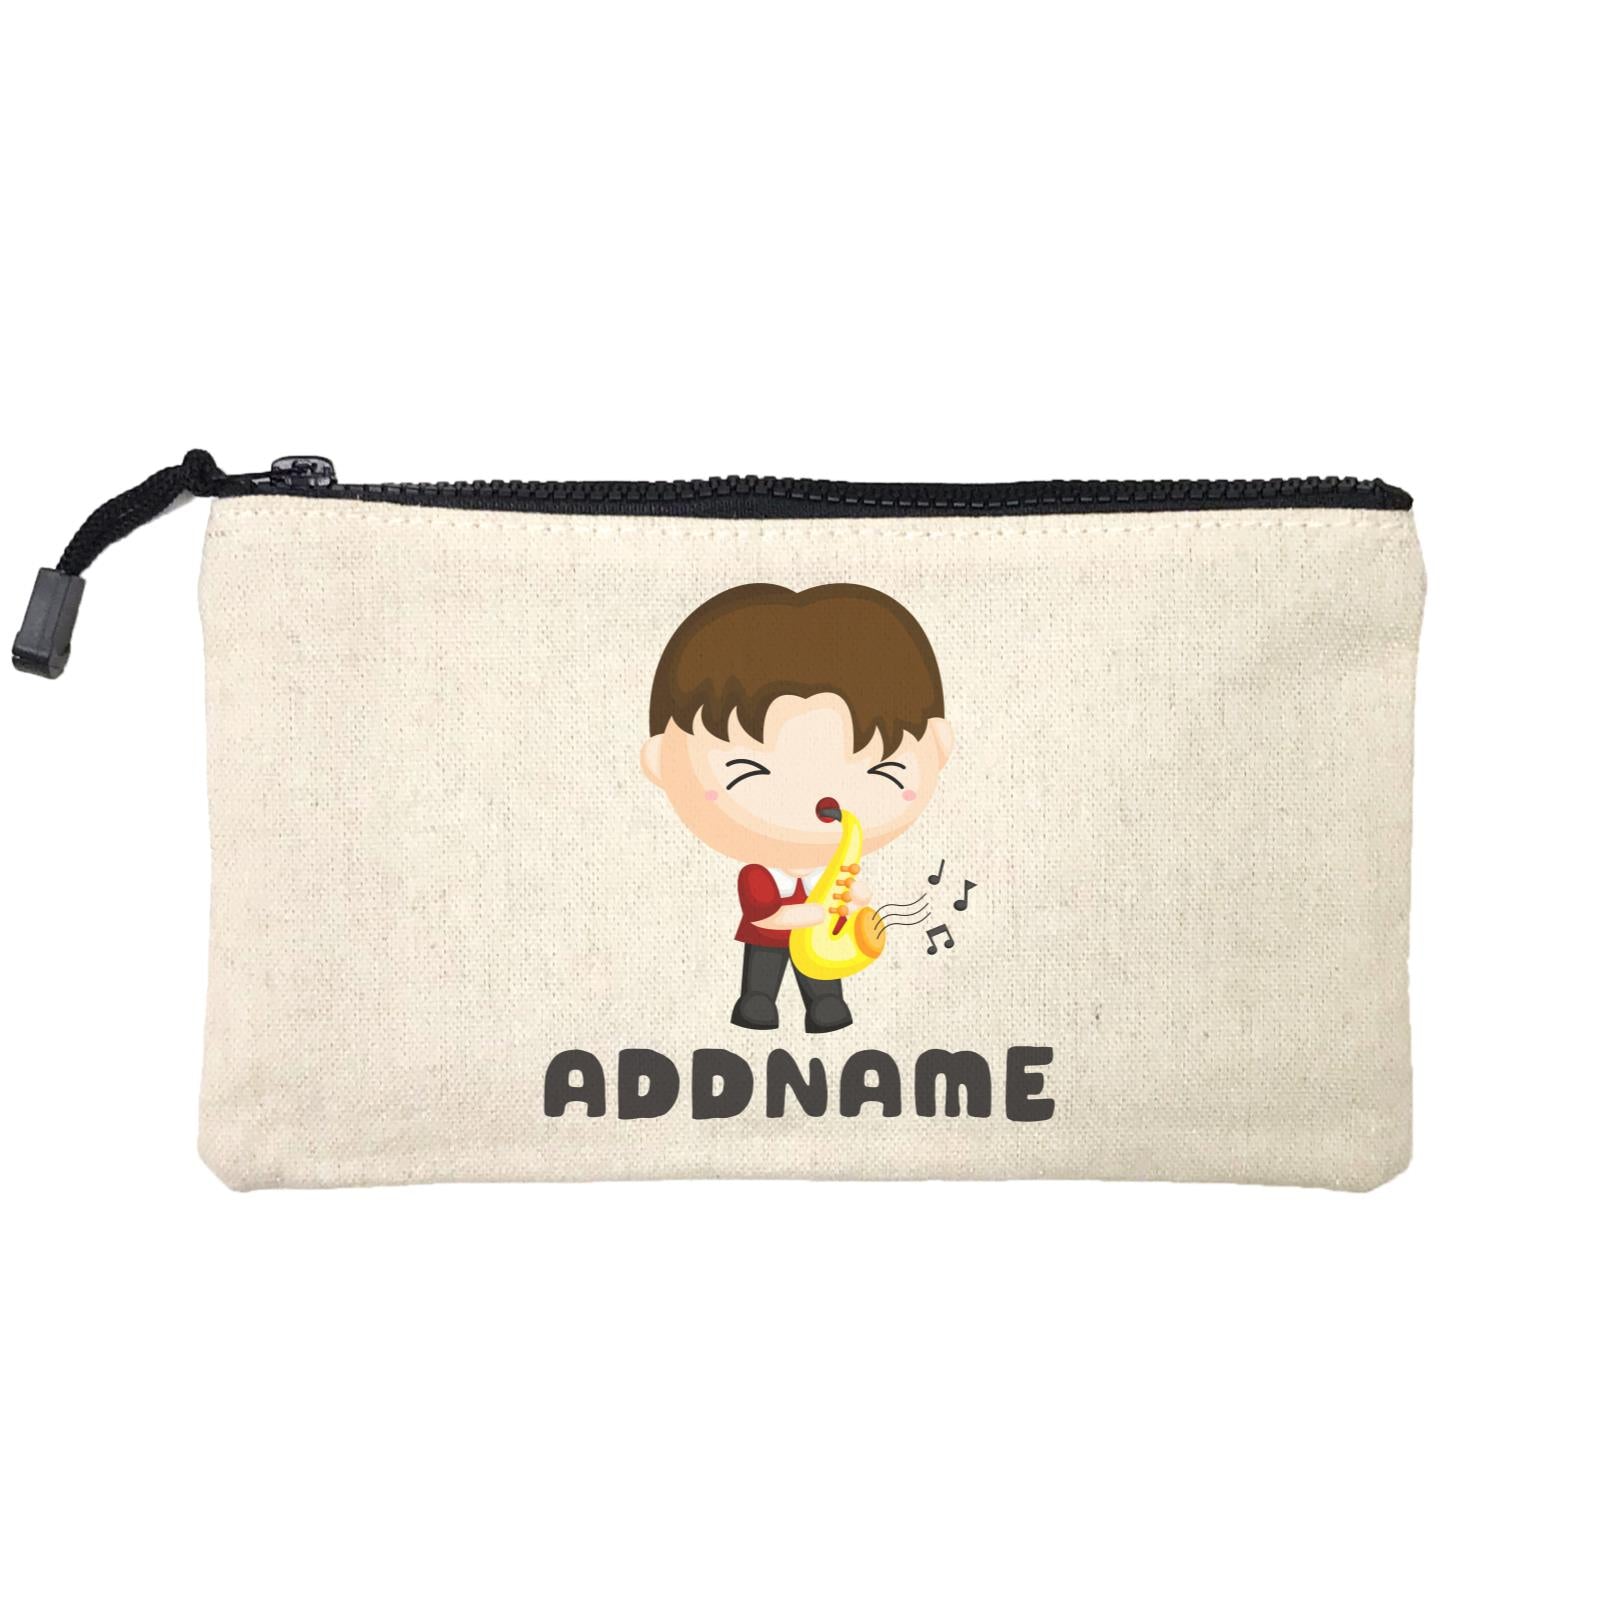 Birthday Music Band Boy Playing Saxophone Addname Mini Accessories Stationery Pouch